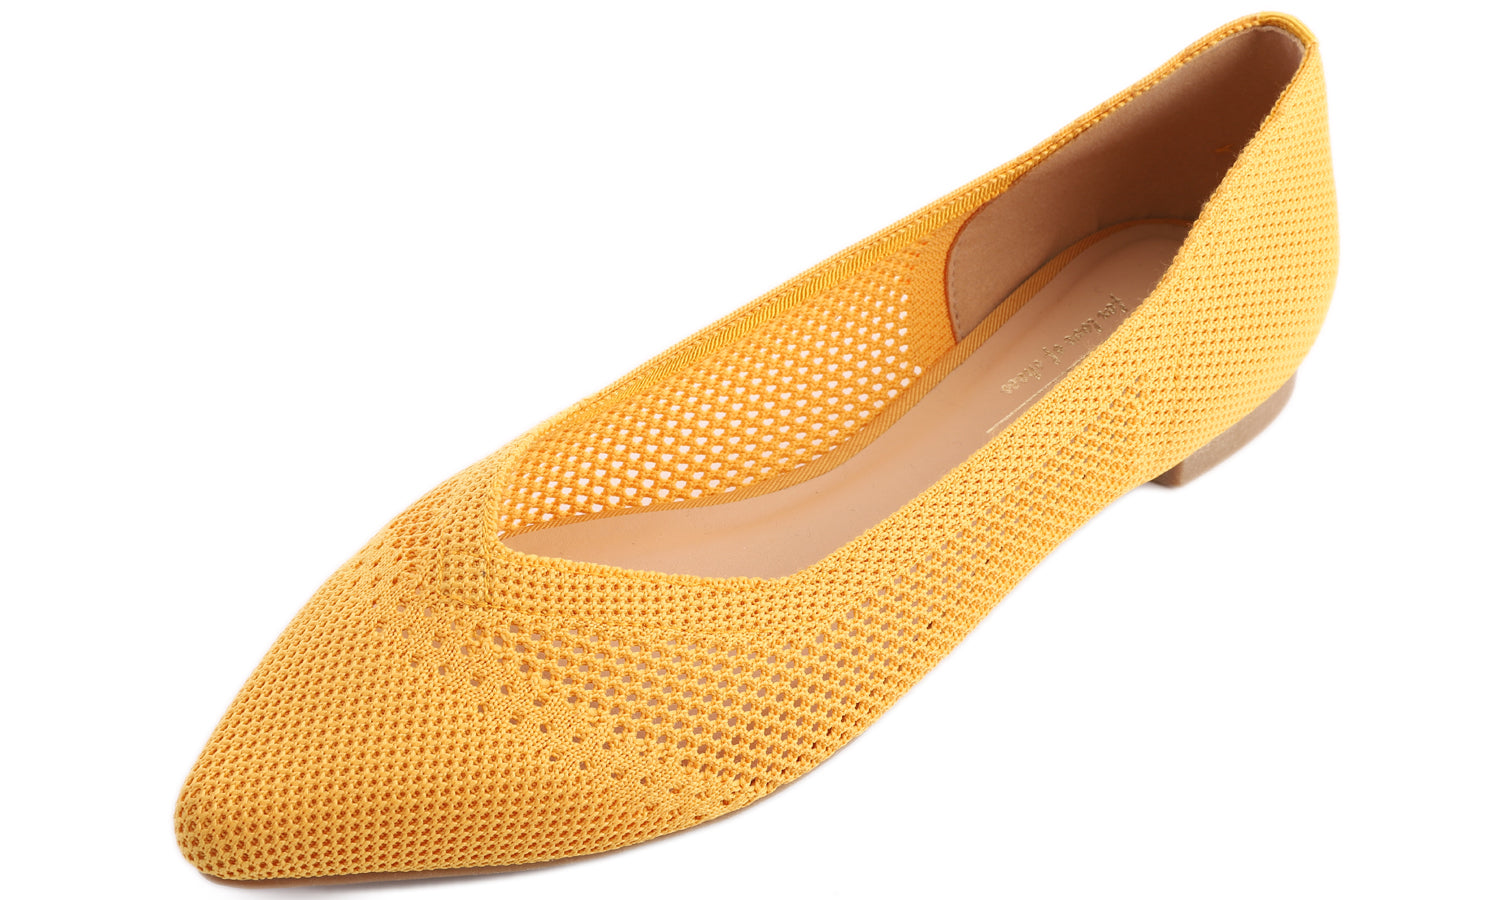 Feversole Women's Woven Fashion Breathable Knit Flat Shoes Pointed Yellow